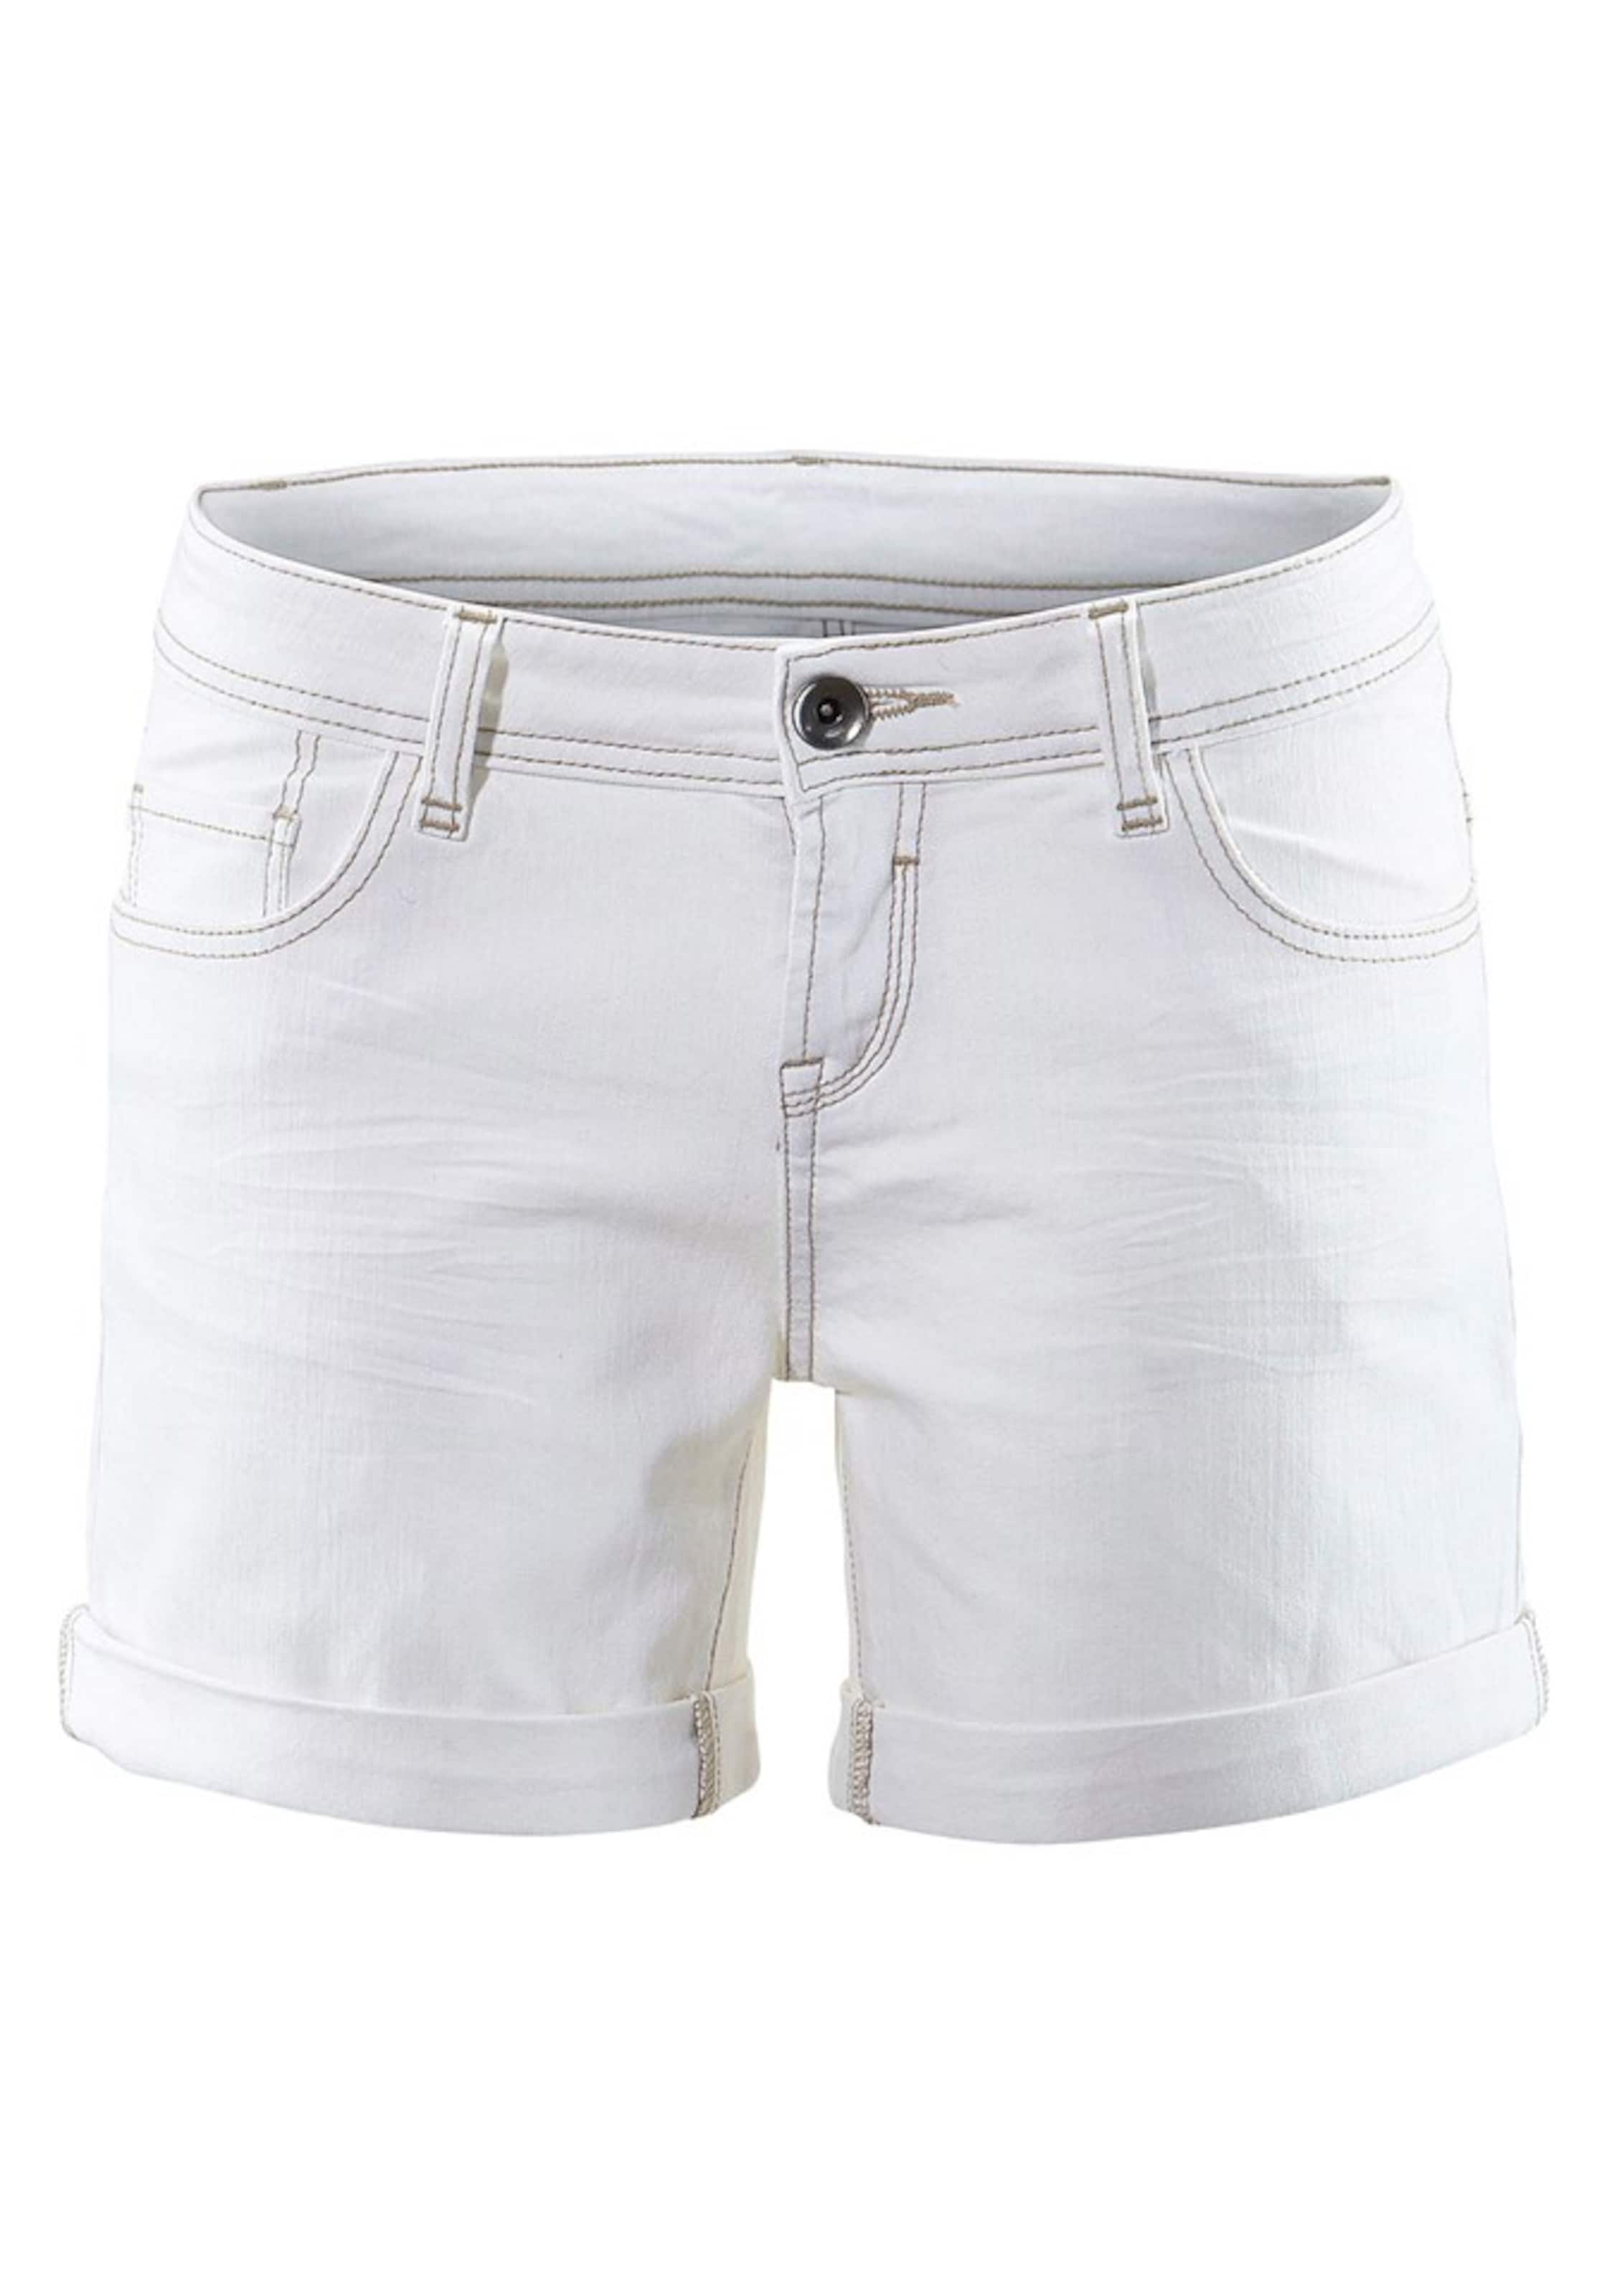 s.Oliver Shorts in Weiß 